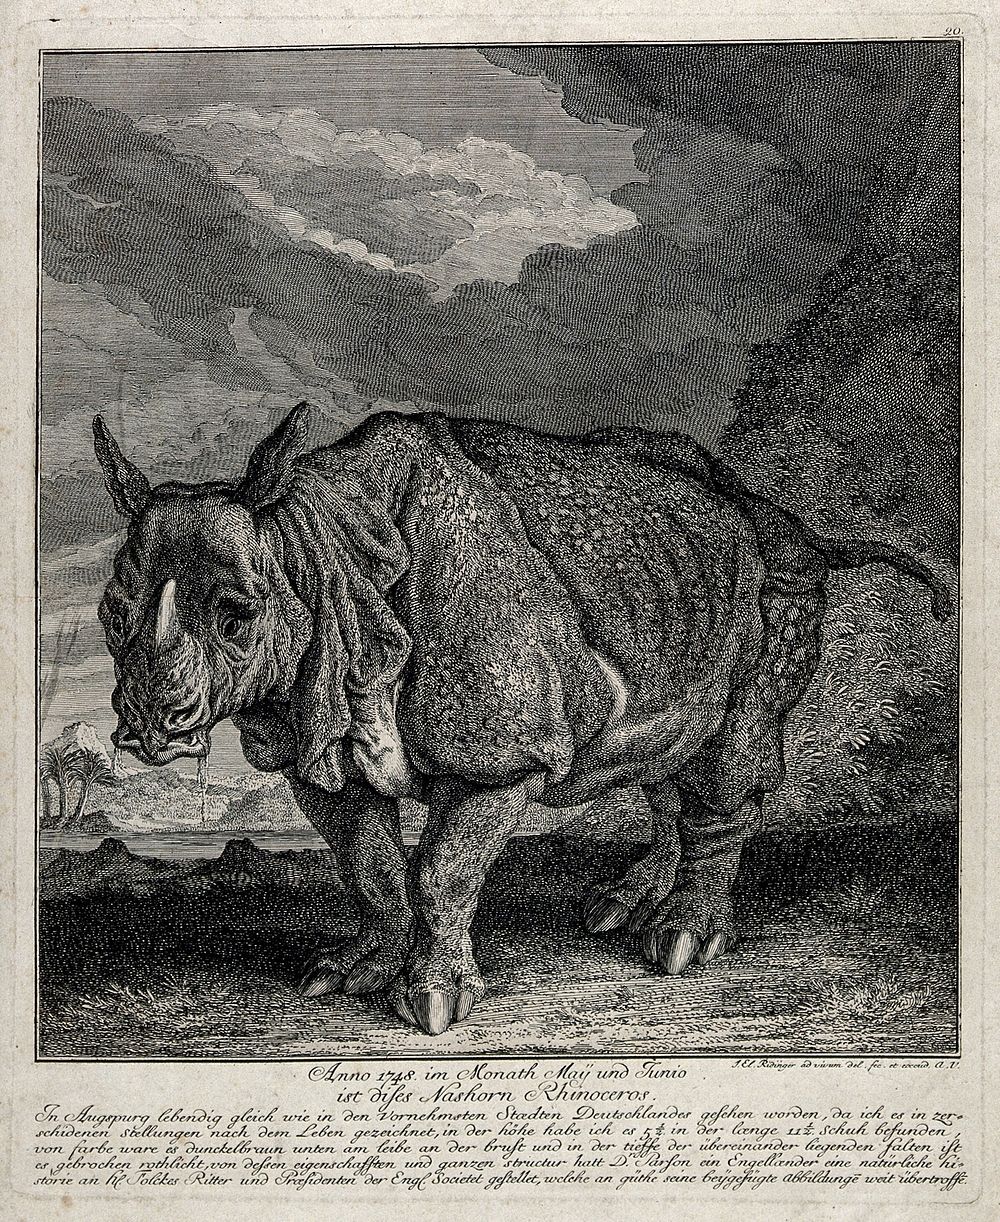 A rhinoceros (Clara) shown with a lake and palm trees in the background. Etching by J. E. Ridinger, ca. 1748.